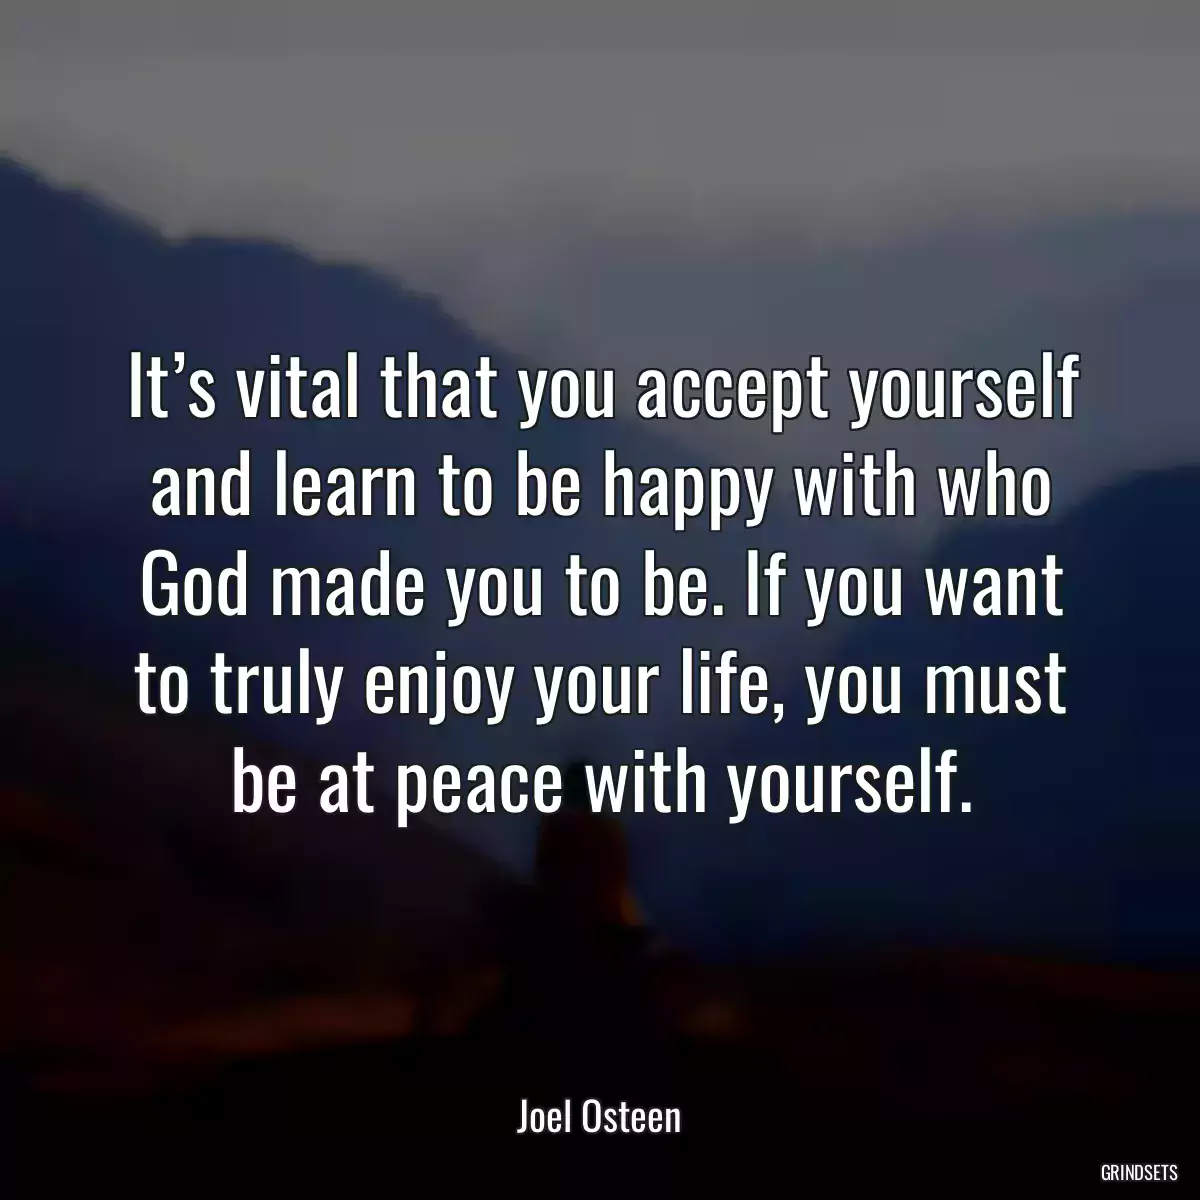 It’s vital that you accept yourself and learn to be happy with who God made you to be. If you want to truly enjoy your life, you must be at peace with yourself.